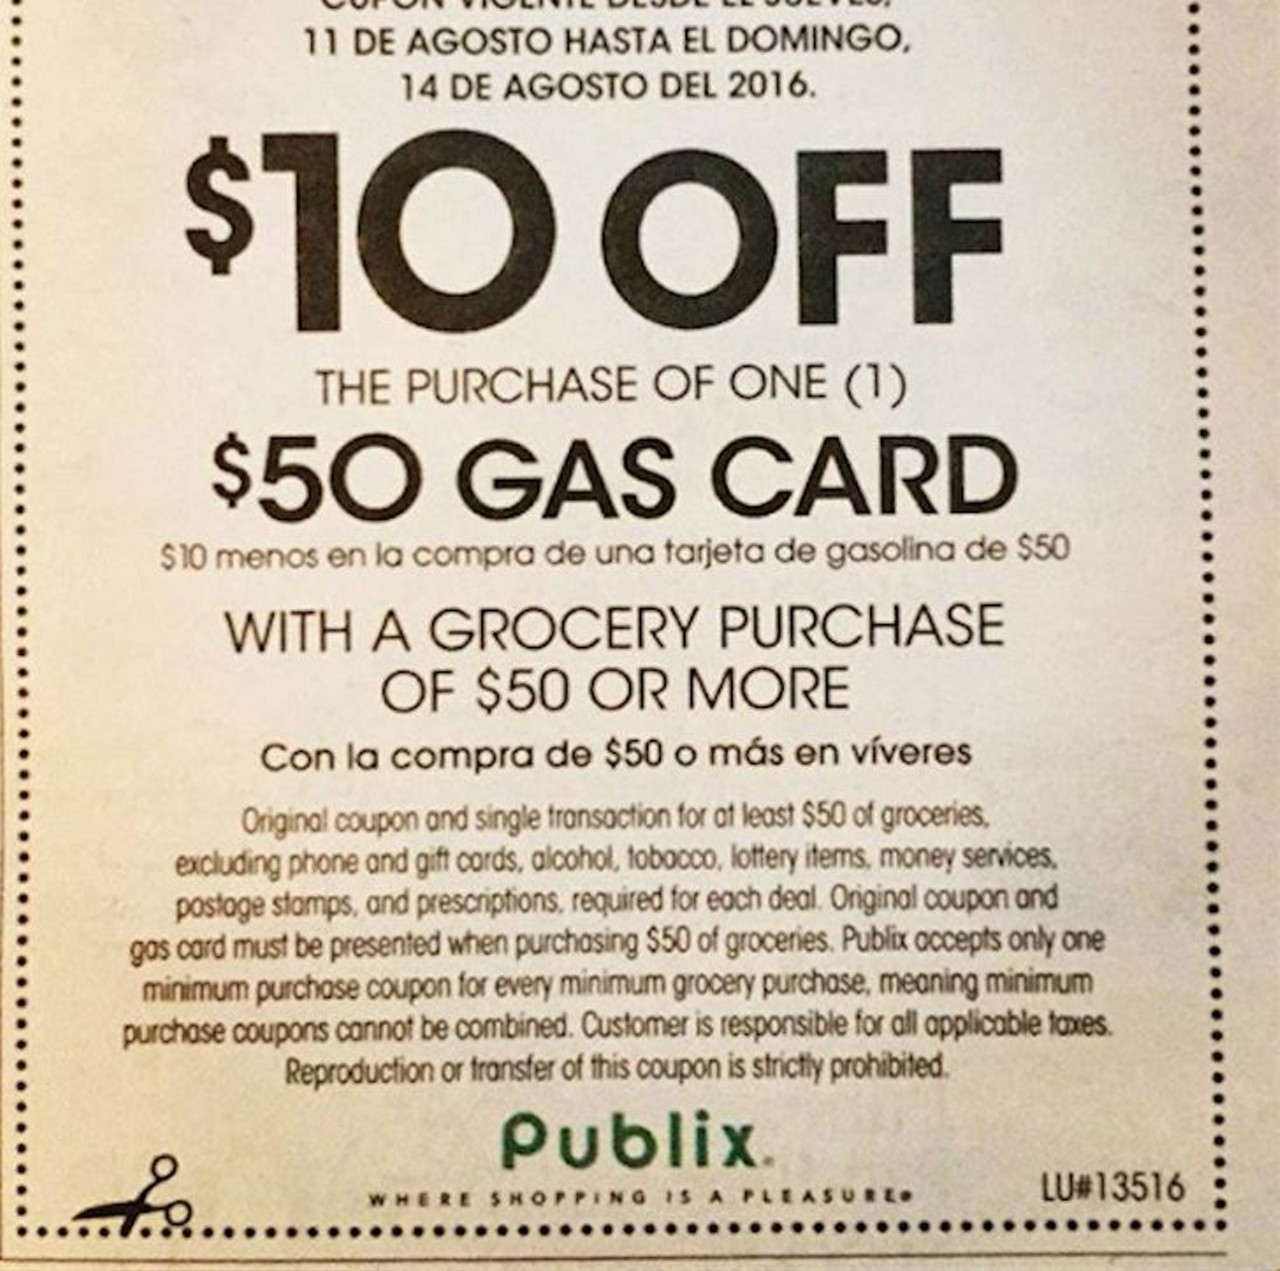 Always get the gas card
Every once in a while, an in-ad coupon for $10 off the purchase of a $50 gas card will appear in the sales paper. The catch is that you can only get this deal if you purchase $50 in groceries, which is pretty easy to do. If your transaction totals out to $50 without the gas card and before you hand over any coupons, then you qualify to purchase the $50 gas card for only $40 and there&#146;s no activation fee. 
Photo via counponinglifewithfiggy/instagram